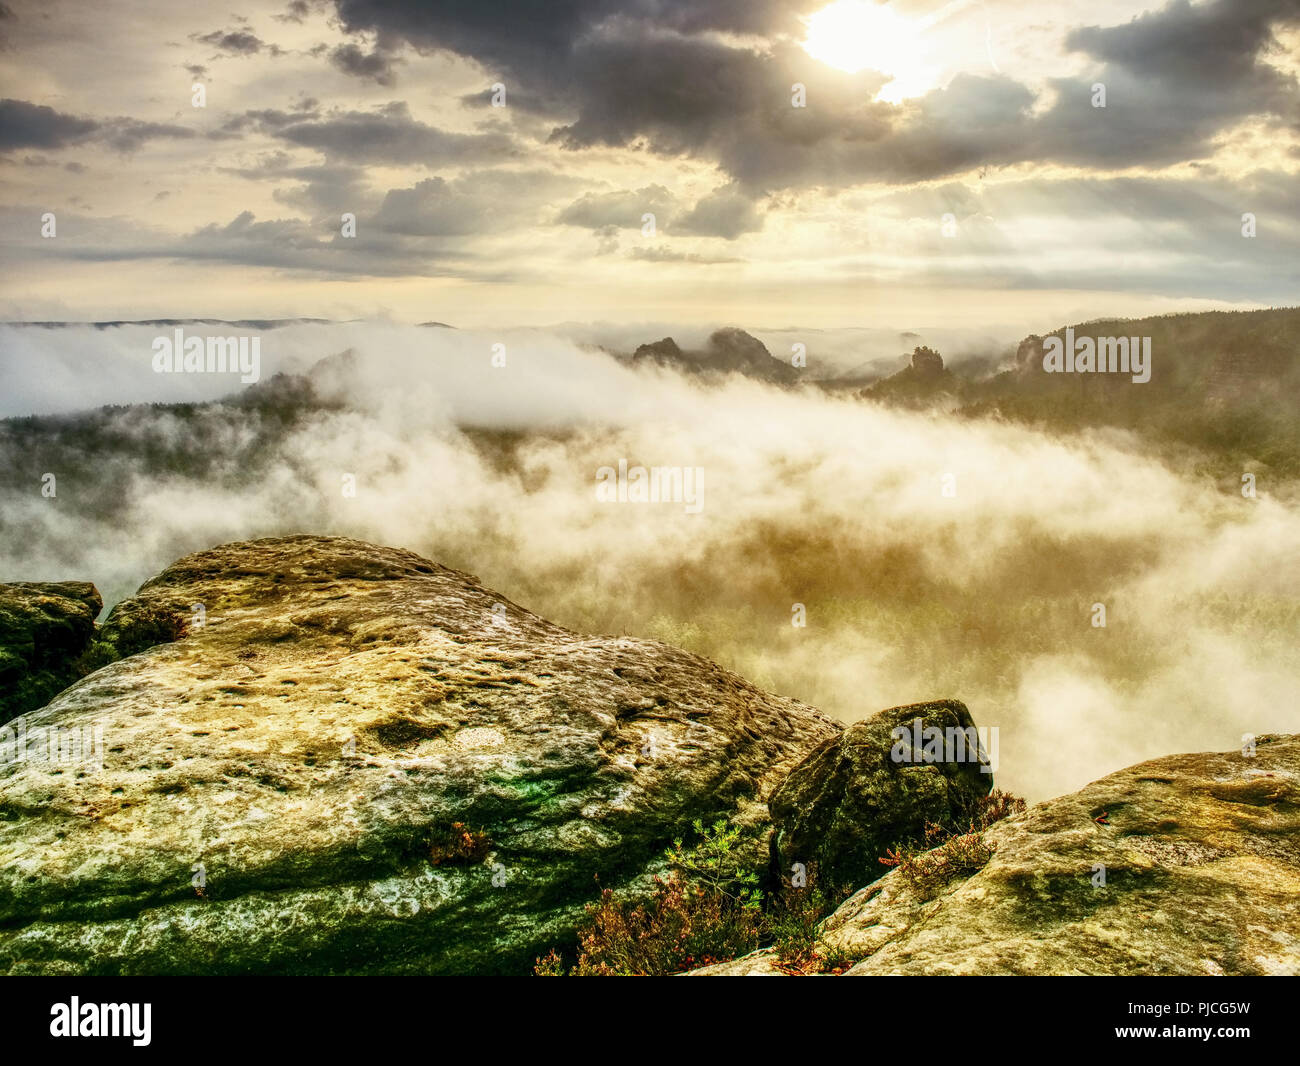 View into misty valley. High trees and rocky peaks increased from thick fog. Stock Photo